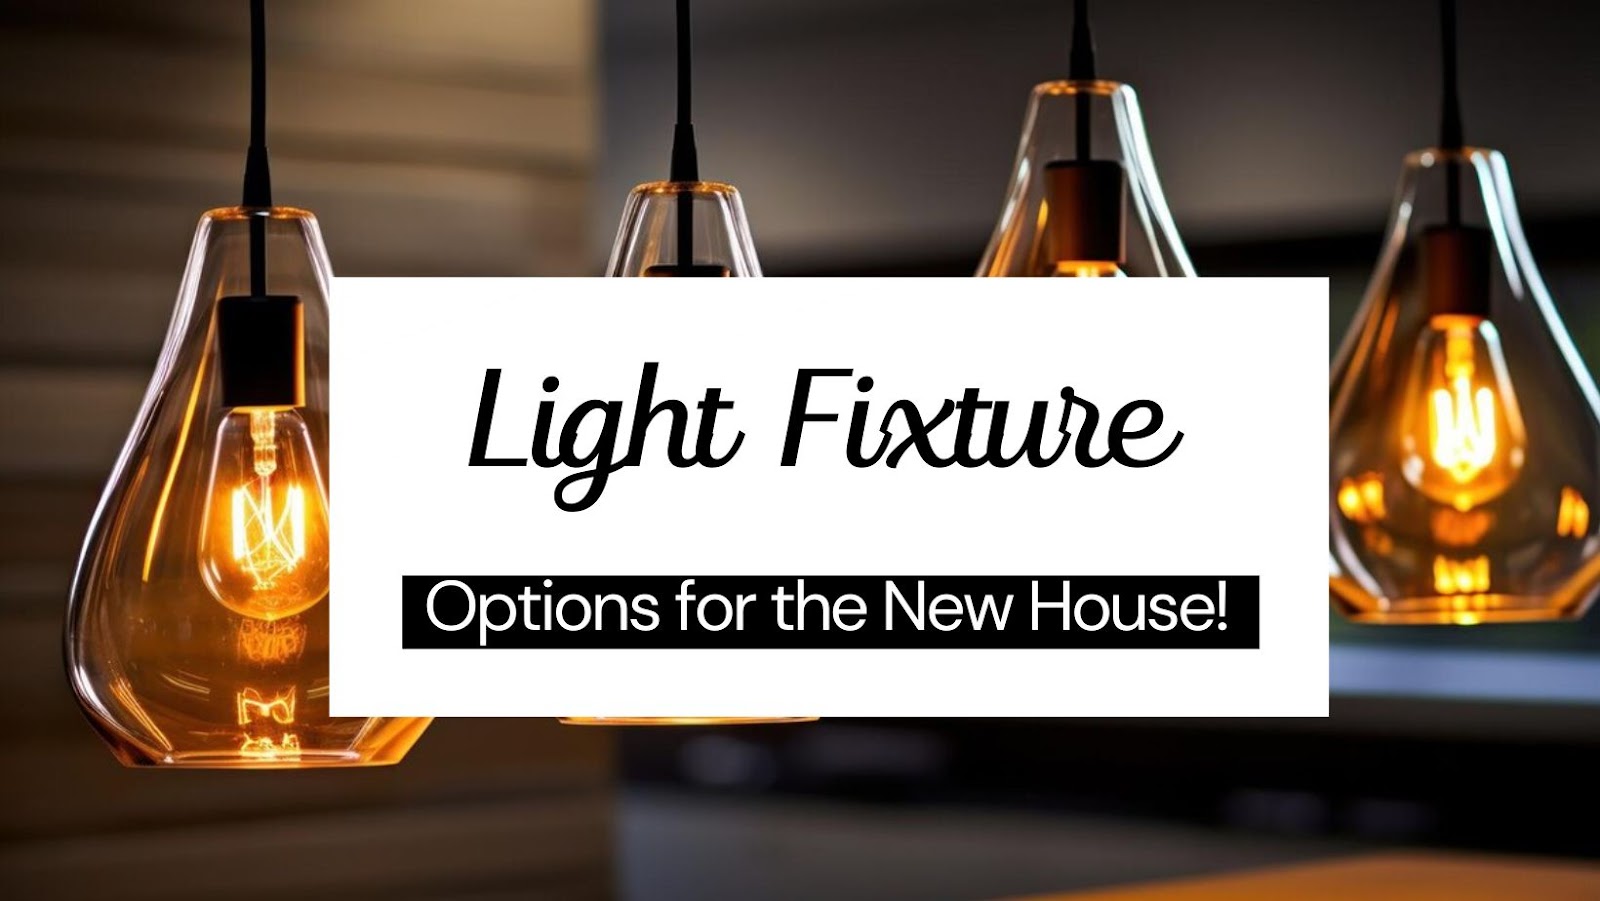 Light Fixture Options for the New House

